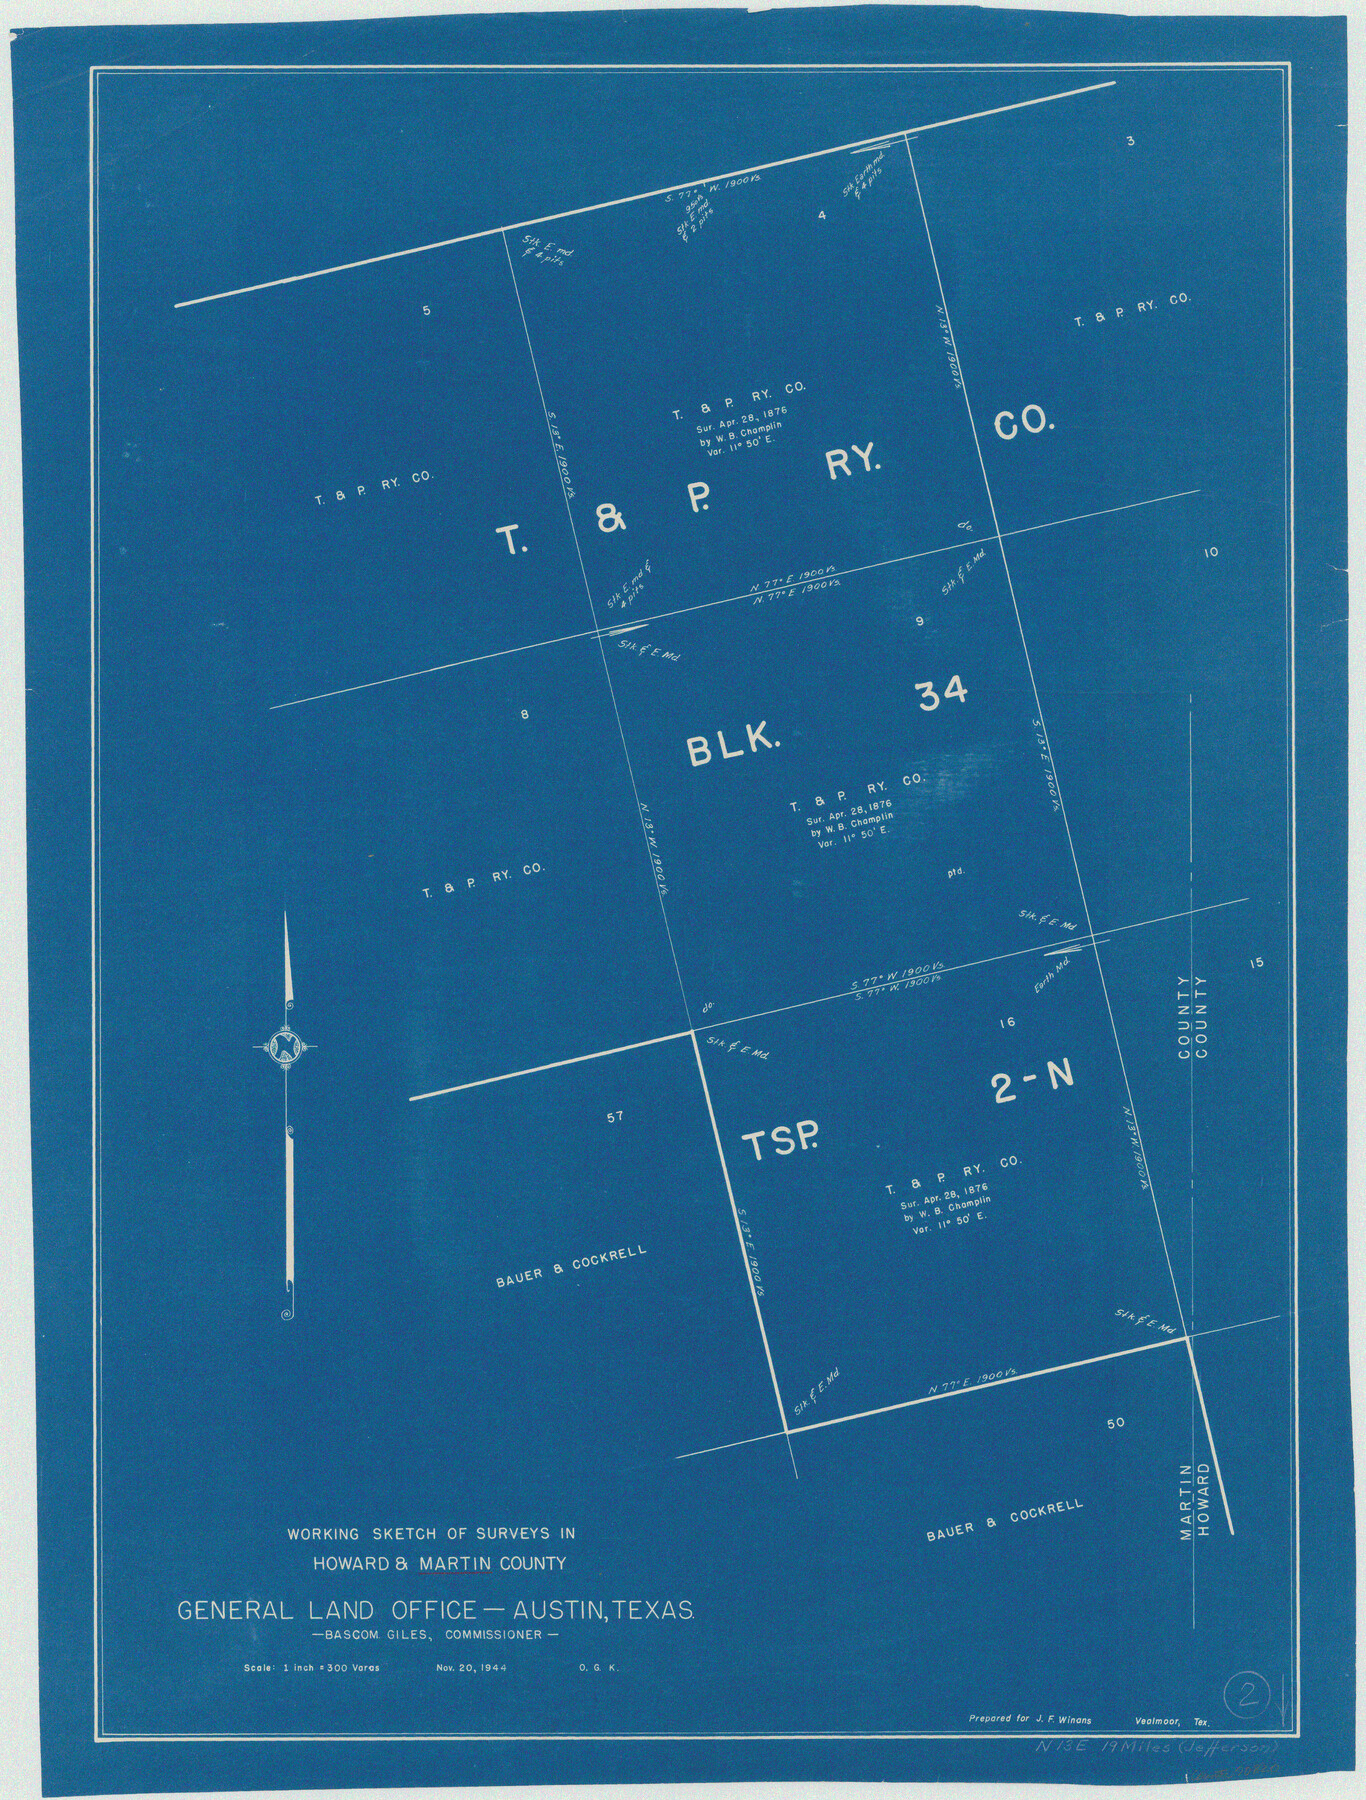 70820, Martin County Working Sketch 2, General Map Collection